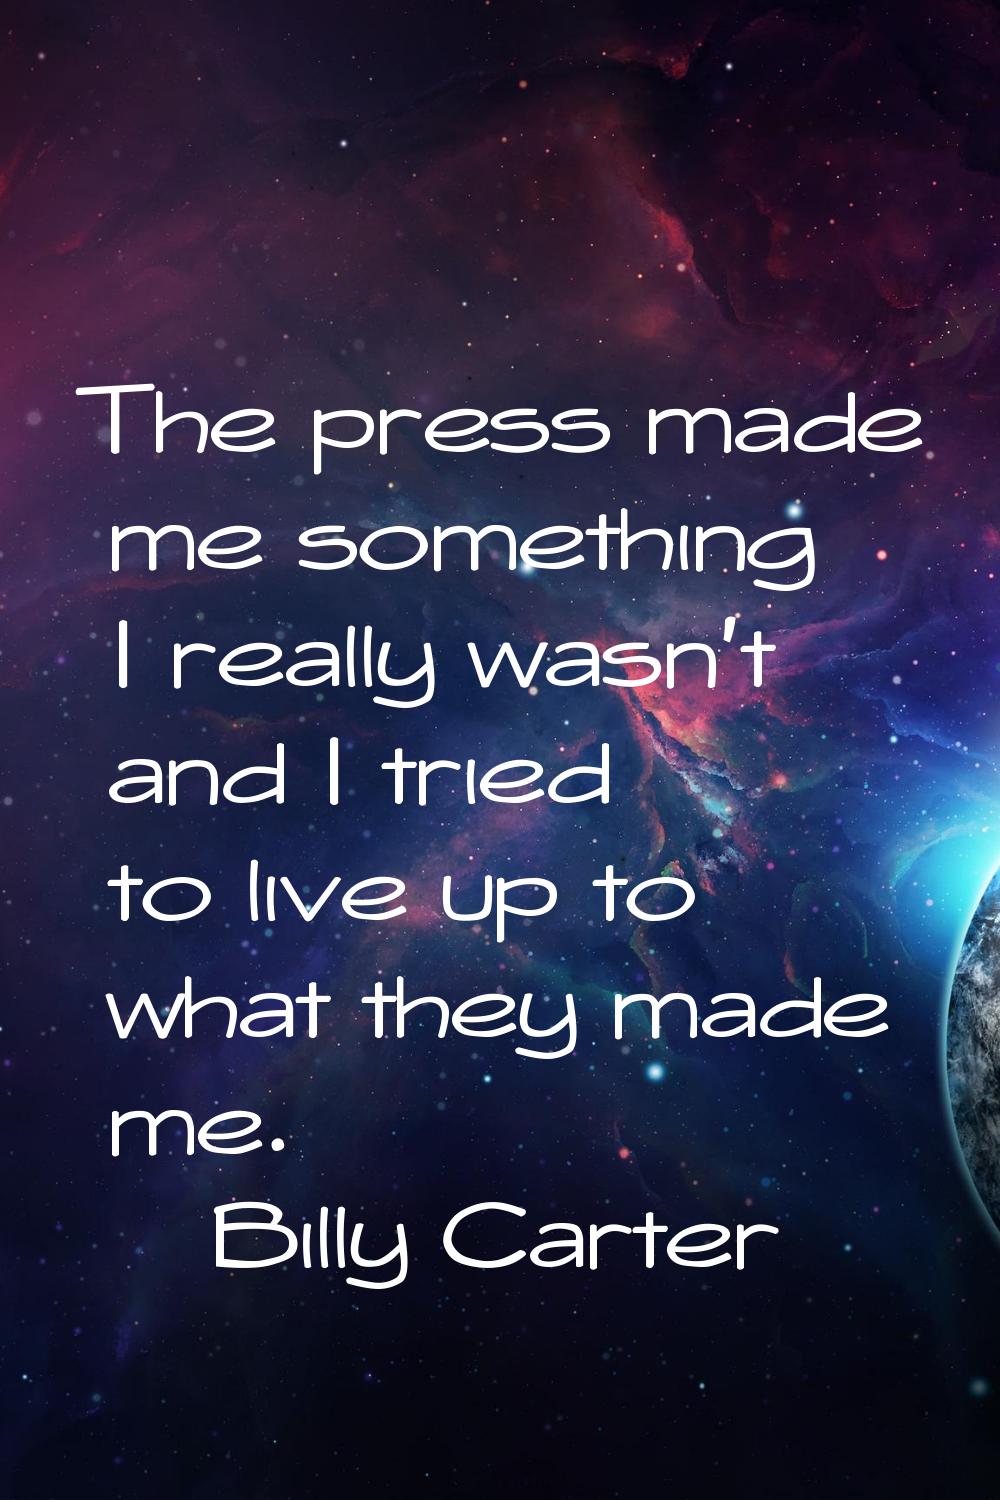 The press made me something I really wasn't and I tried to live up to what they made me.